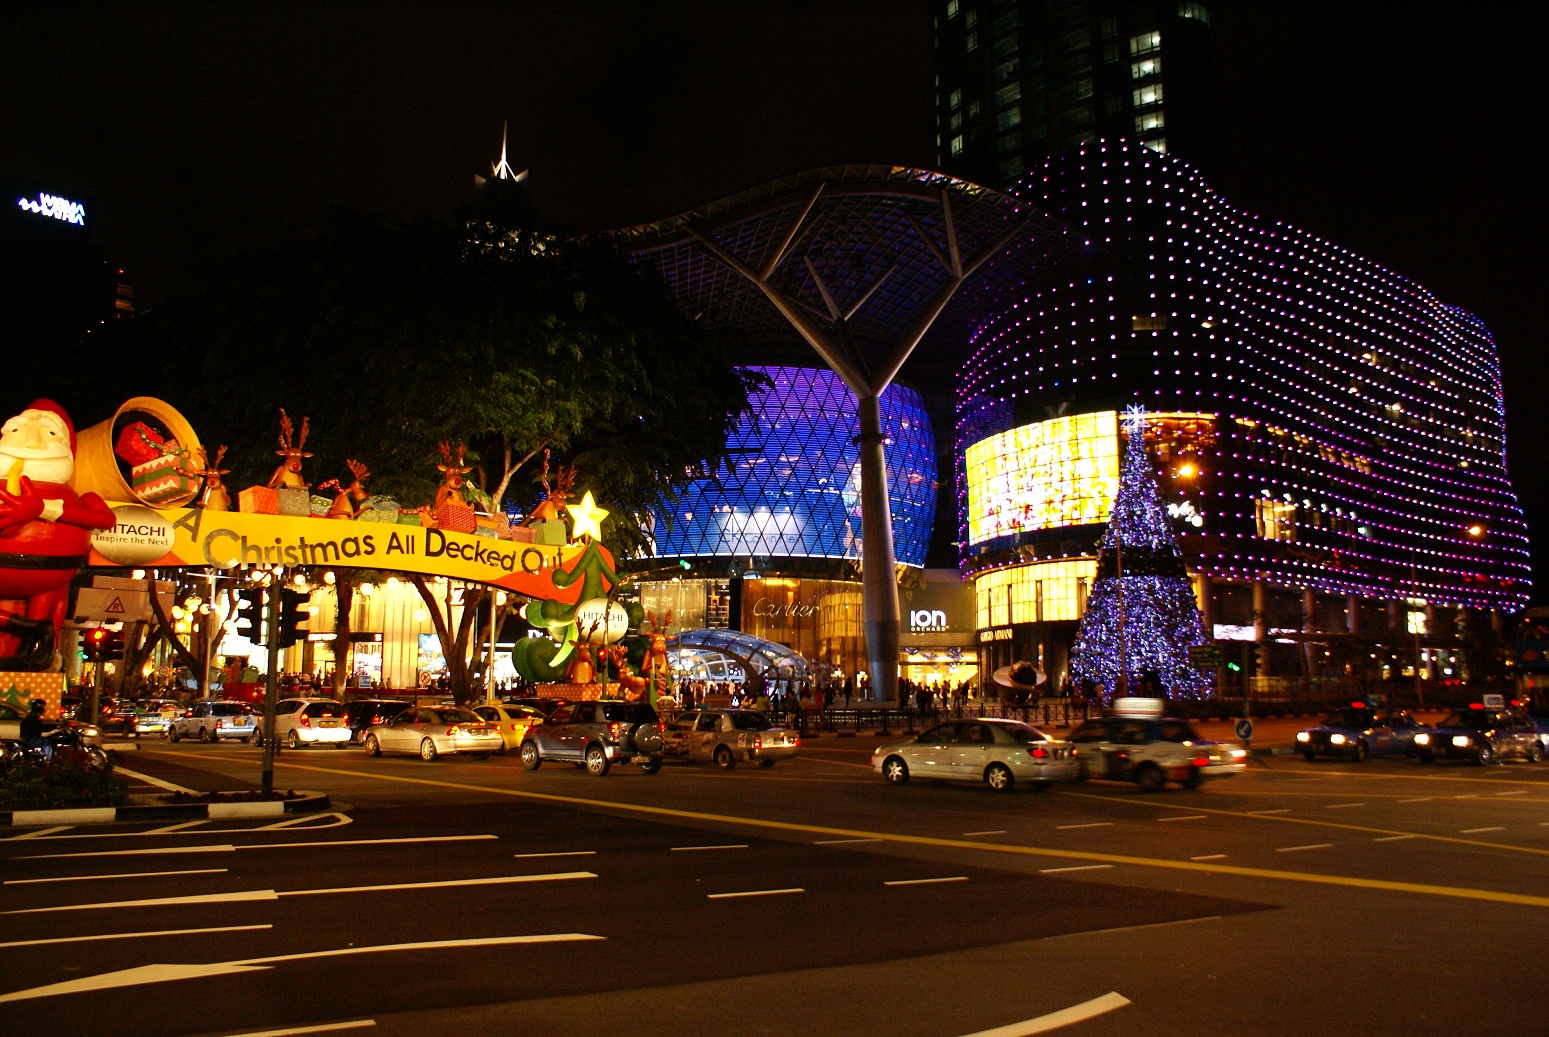 Ion Orchard, above Singapore's Orchard MRT